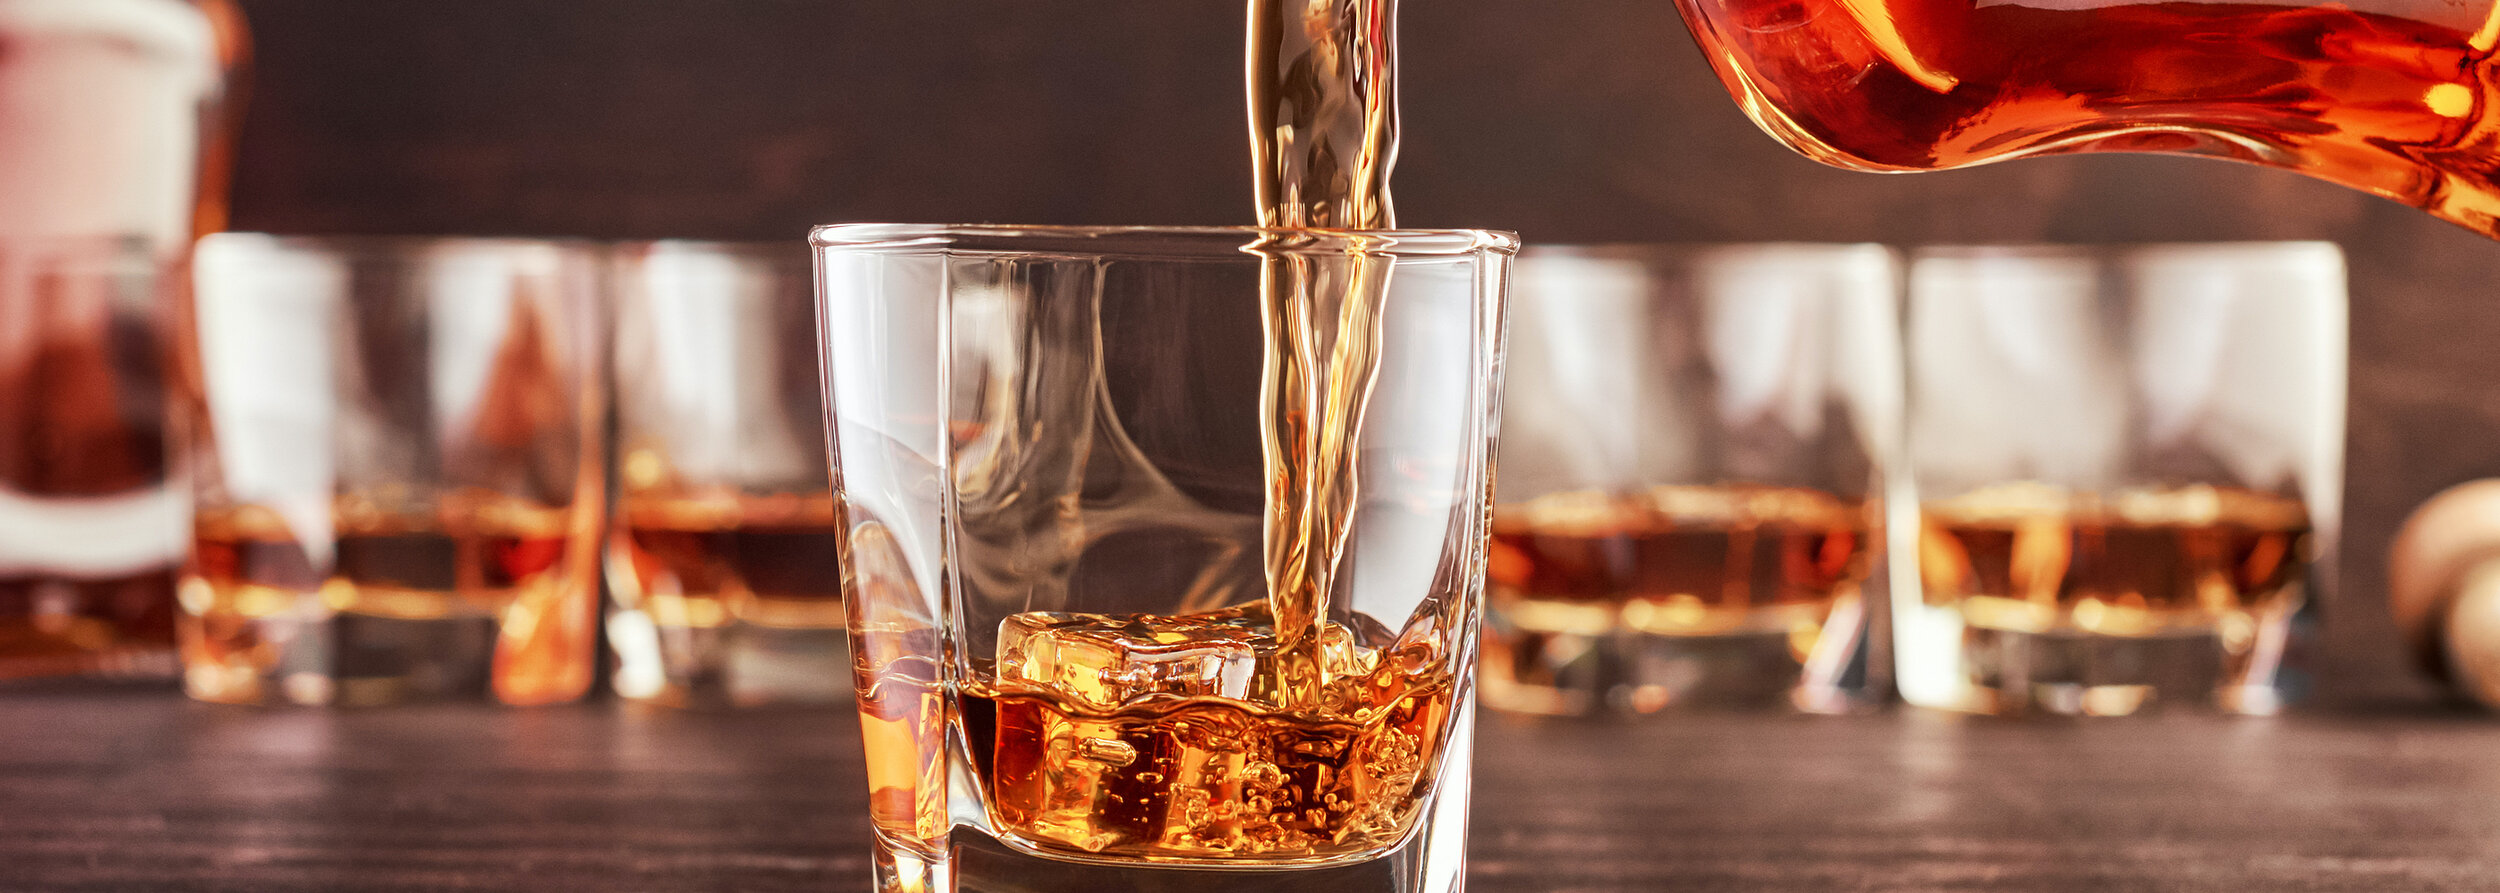 bigstock-A-Glass-Of-Whiskey-On-A-Wooden-317701267.jpg